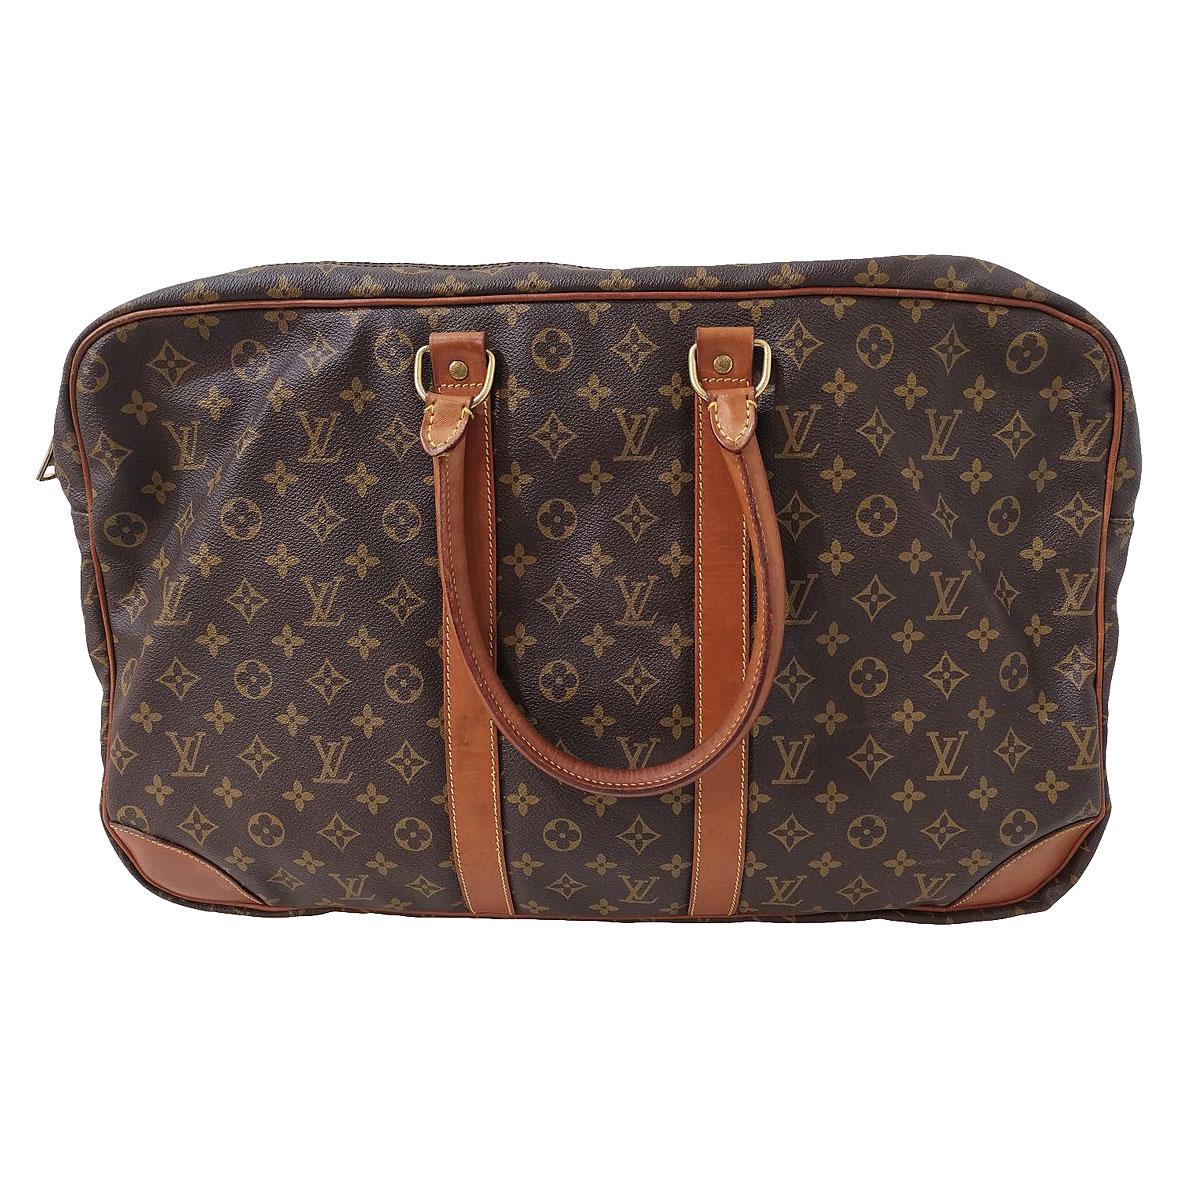 Iconic LV travel bag
Vintage 
Monogram 
Double handle
Three compartments
Zip closure
Address-pendant
Cm 68 x 38  (26,77 x 14,96 inches)
Few signs on the leather buckles, see pictures
Some missing zip sliders, see pictures
Presence of some spots due